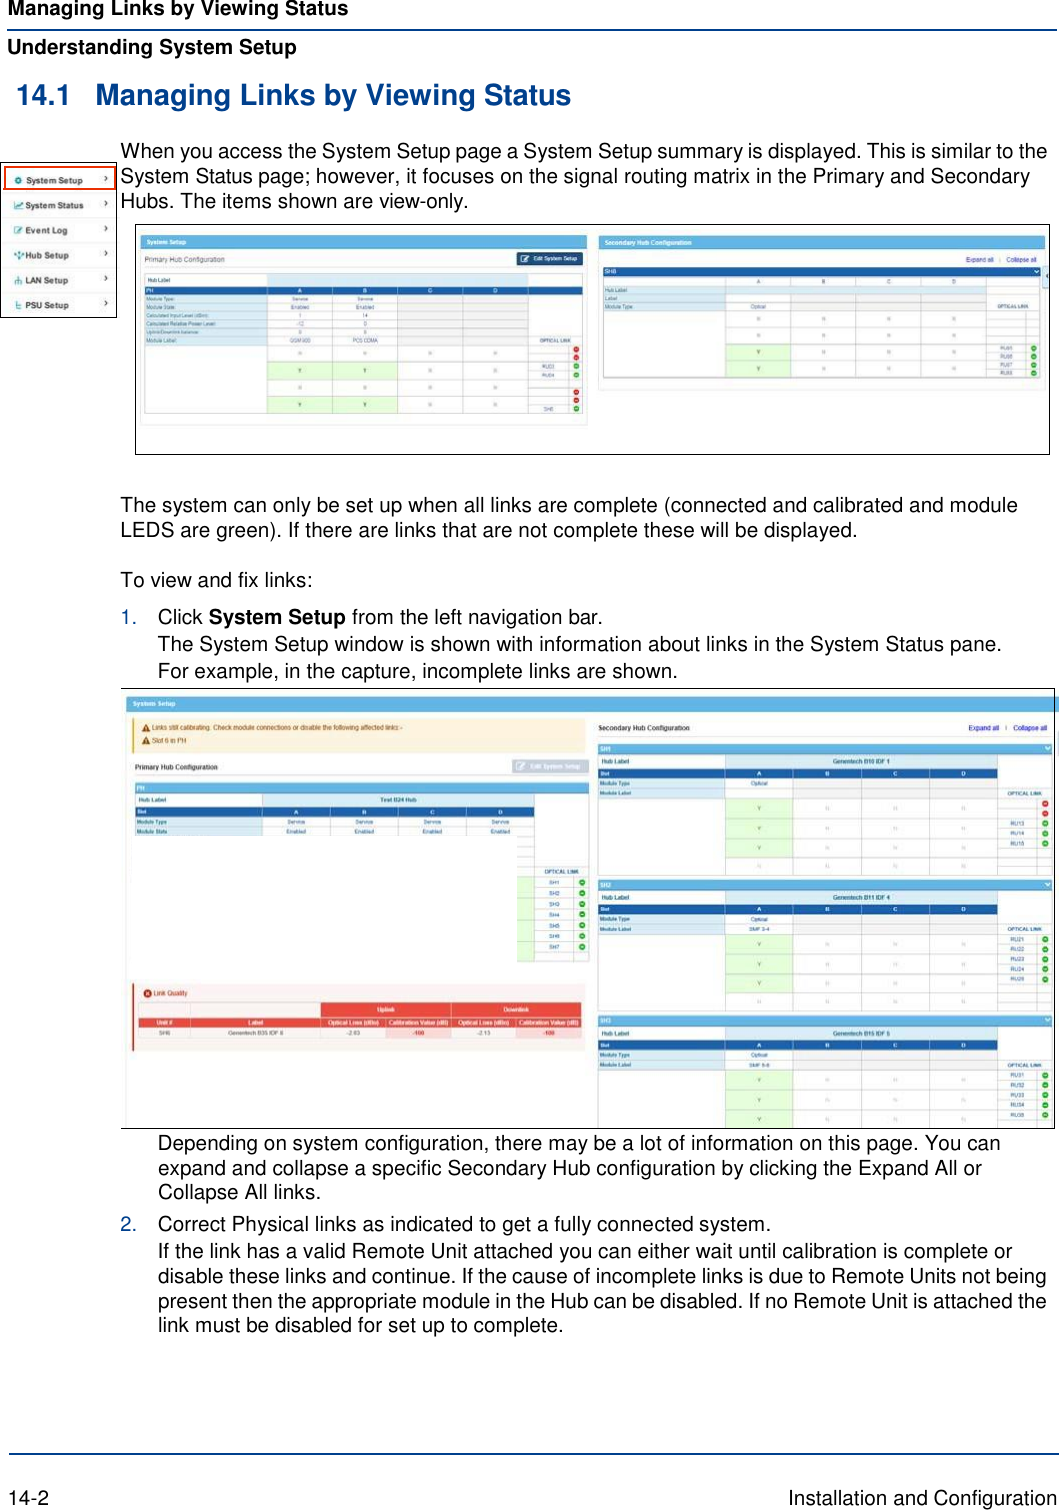 Managing Links by Viewing Status Understanding System Setup 14.1 Managing Links by Viewing Status When you access the System Setup page a System Setup summary is displayed. This is similar to the System Status page; however, it focuses on the signal routing matrix in the Primary and Secondary Hubs. The items shown are view-only.     The system can only be set up when all links are complete (connected and calibrated and module LEDS are green). If there are links that are not complete these will be displayed.  To view and fix links: 1. Click System Setup from the left navigation bar. The System Setup window is shown with information about links in the System Status pane. For example, in the capture, incomplete links are shown.  Depending on system configuration, there may be a lot of information on this page. You can expand and collapse a specific Secondary Hub configuration by clicking the Expand All or Collapse All links. 2. Correct Physical links as indicated to get a fully connected system. If the link has a valid Remote Unit attached you can either wait until calibration is complete or disable these links and continue. If the cause of incomplete links is due to Remote Units not being present then the appropriate module in the Hub can be disabled. If no Remote Unit is attached the link must be disabled for set up to complete.       14-2  Installation and Configuration 